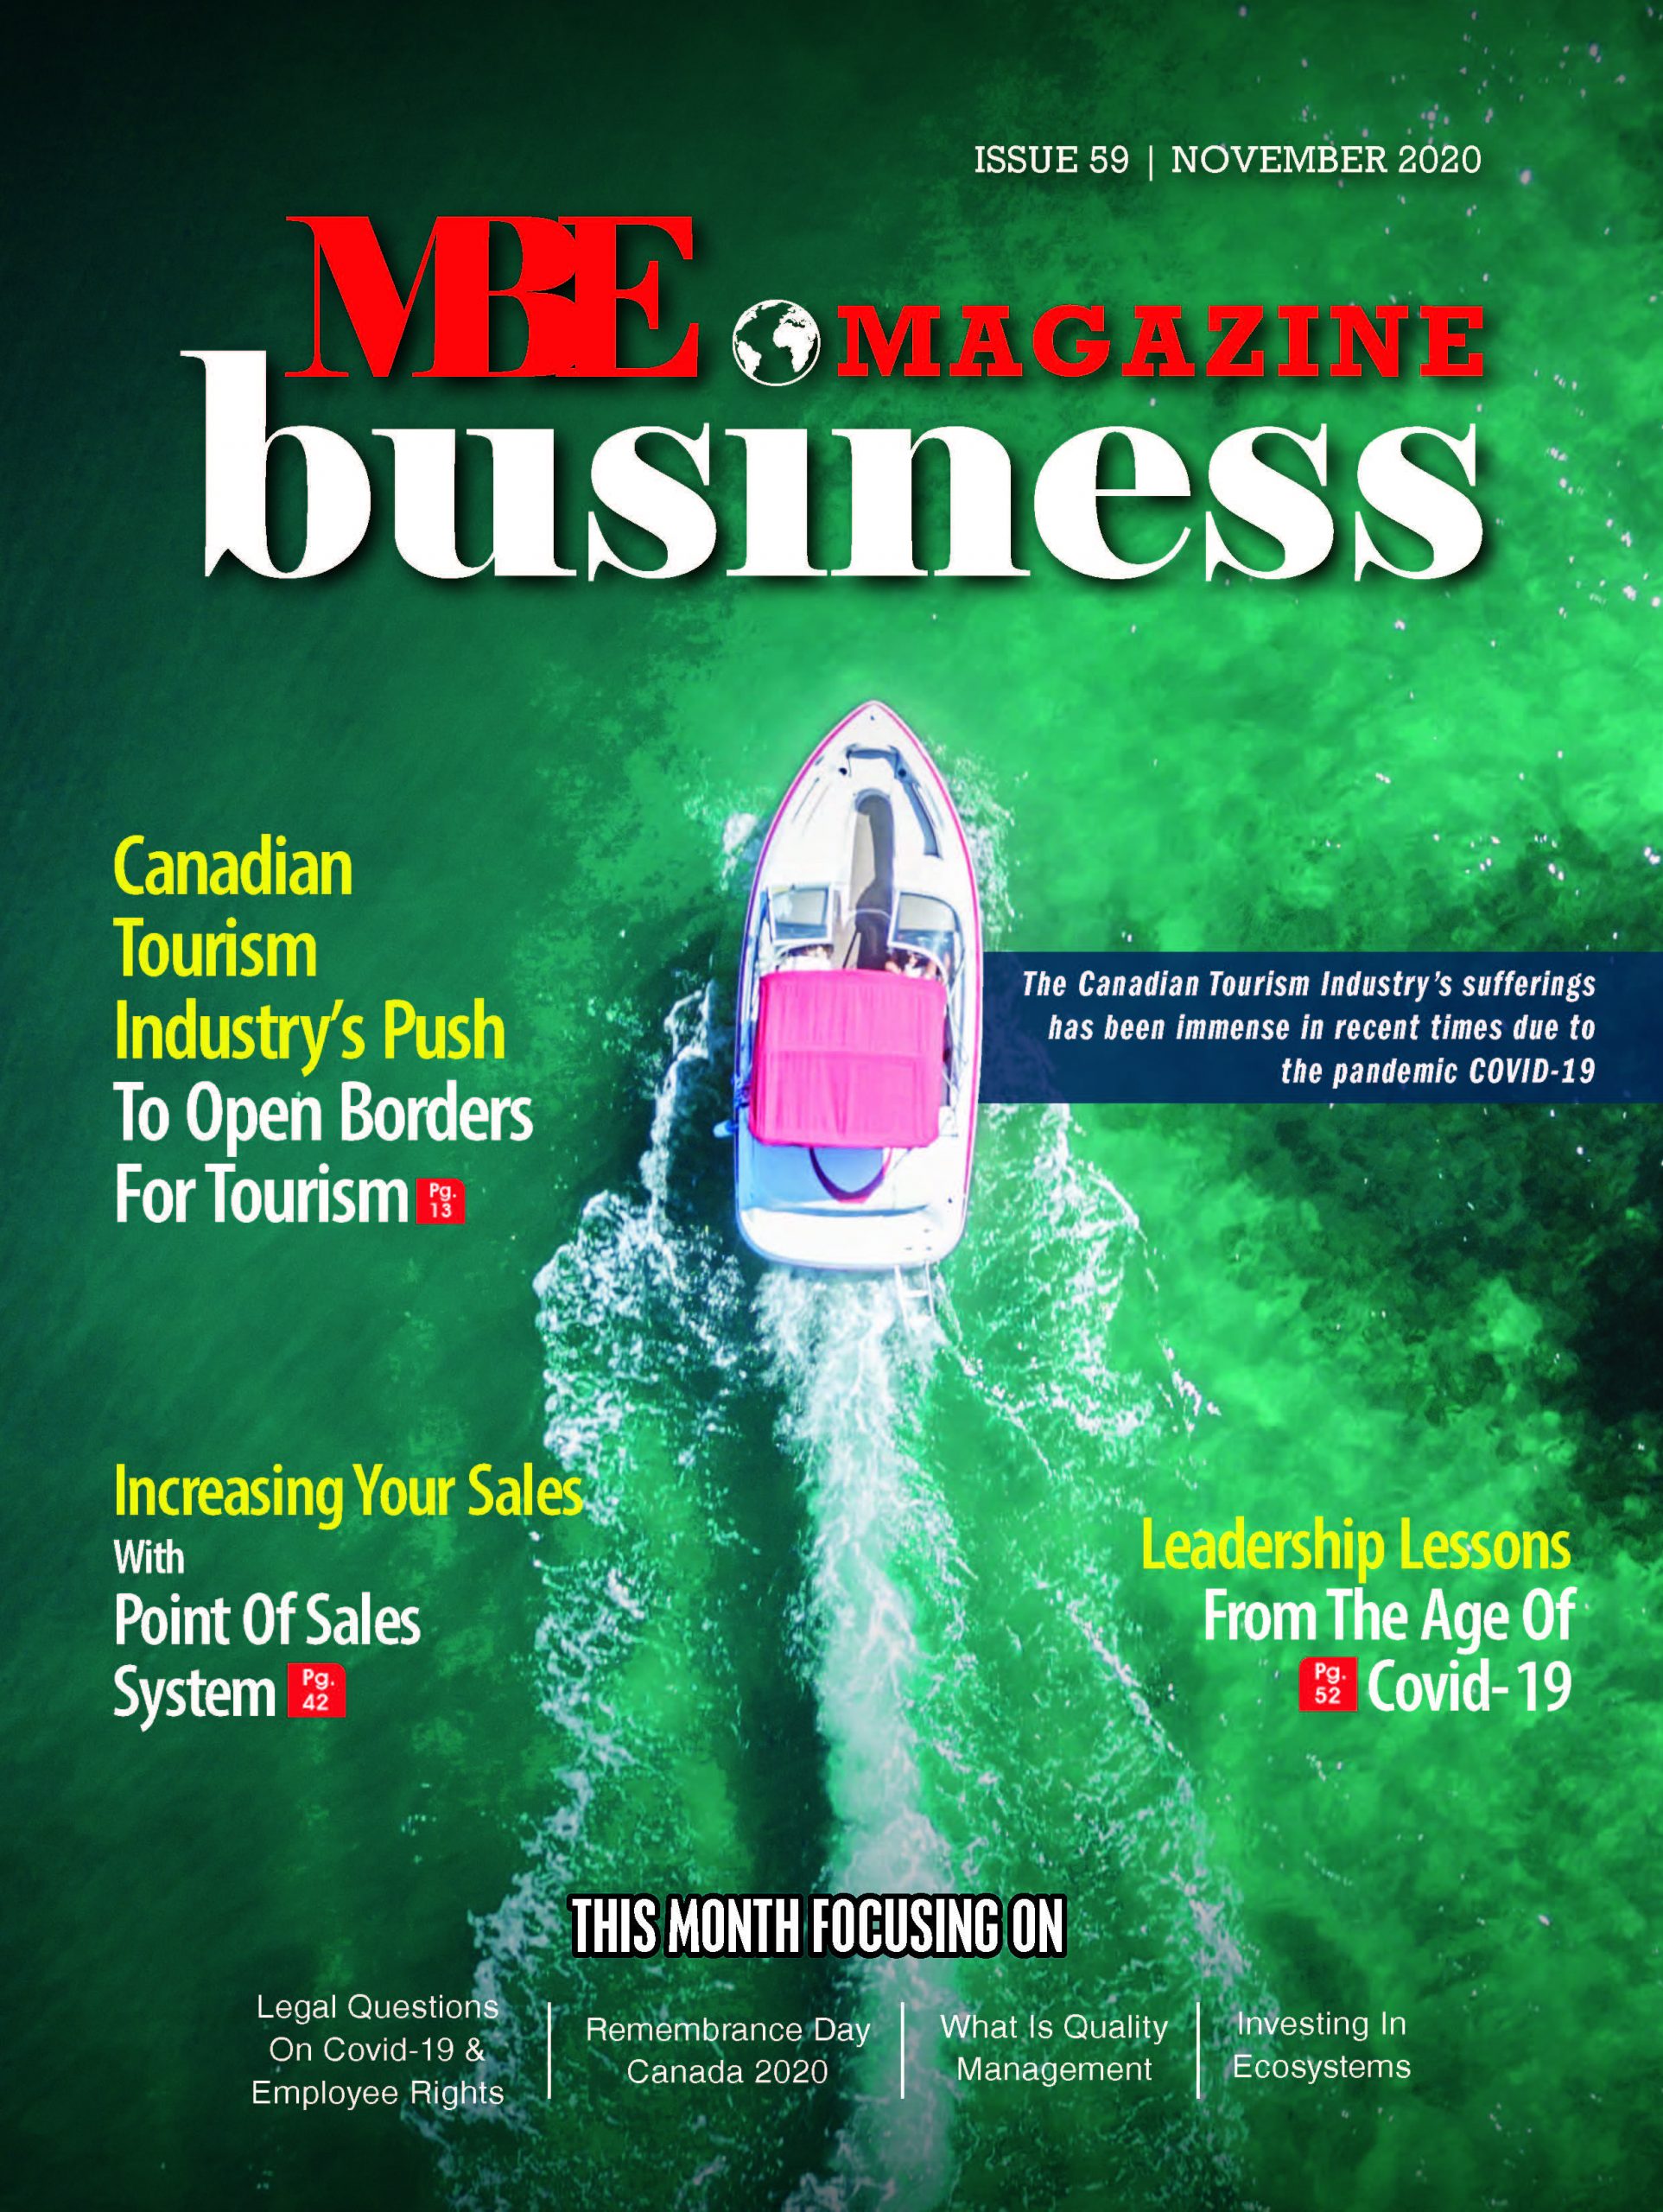 canadian tourism industry push to open borders for tourism- mbe business magazine_Page_01